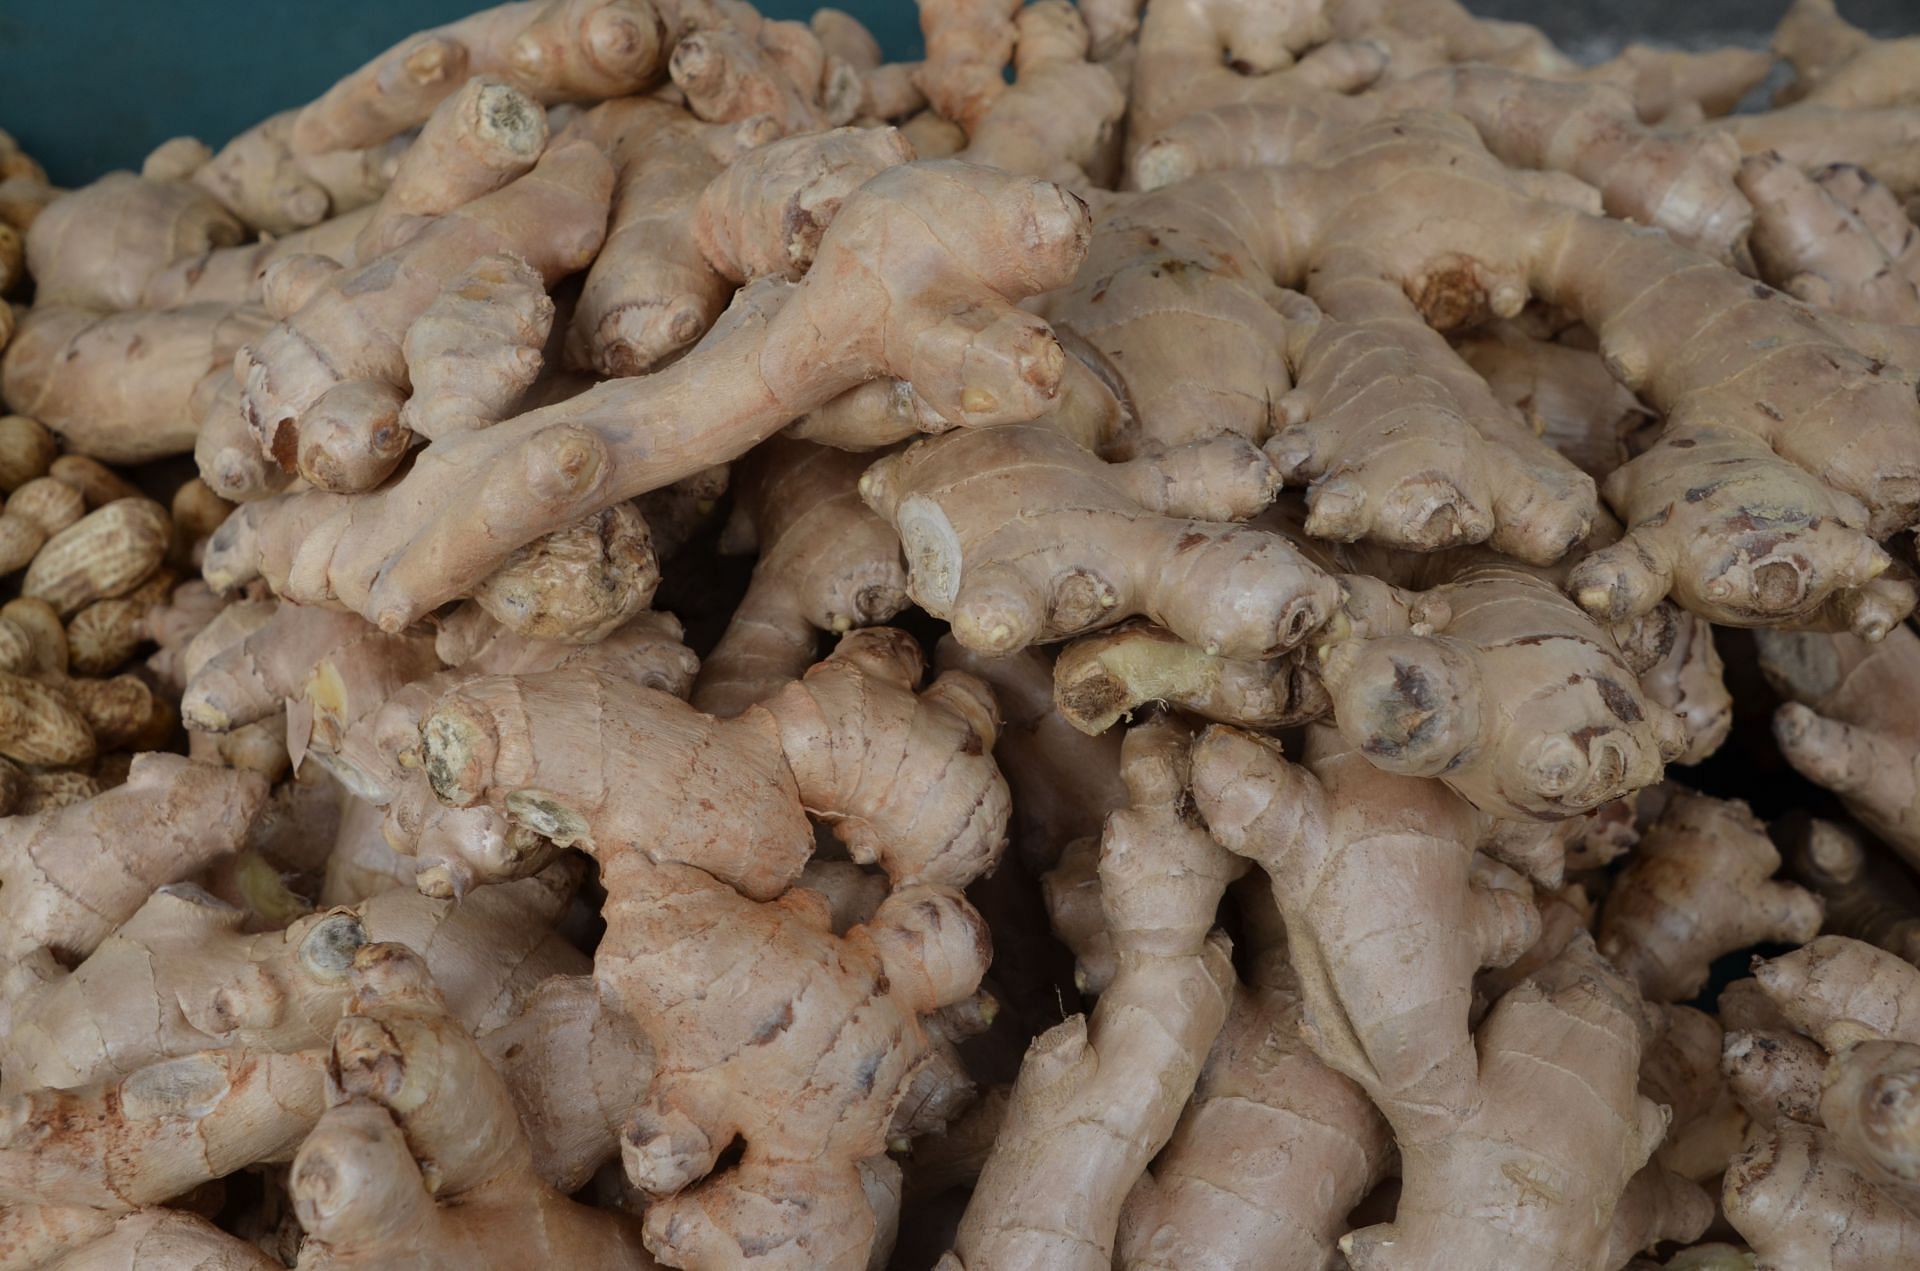 Ginger contains compounds like gingerols and shogaols that aid in relieving nausea (Image via Unsplash/Donghun Shin)